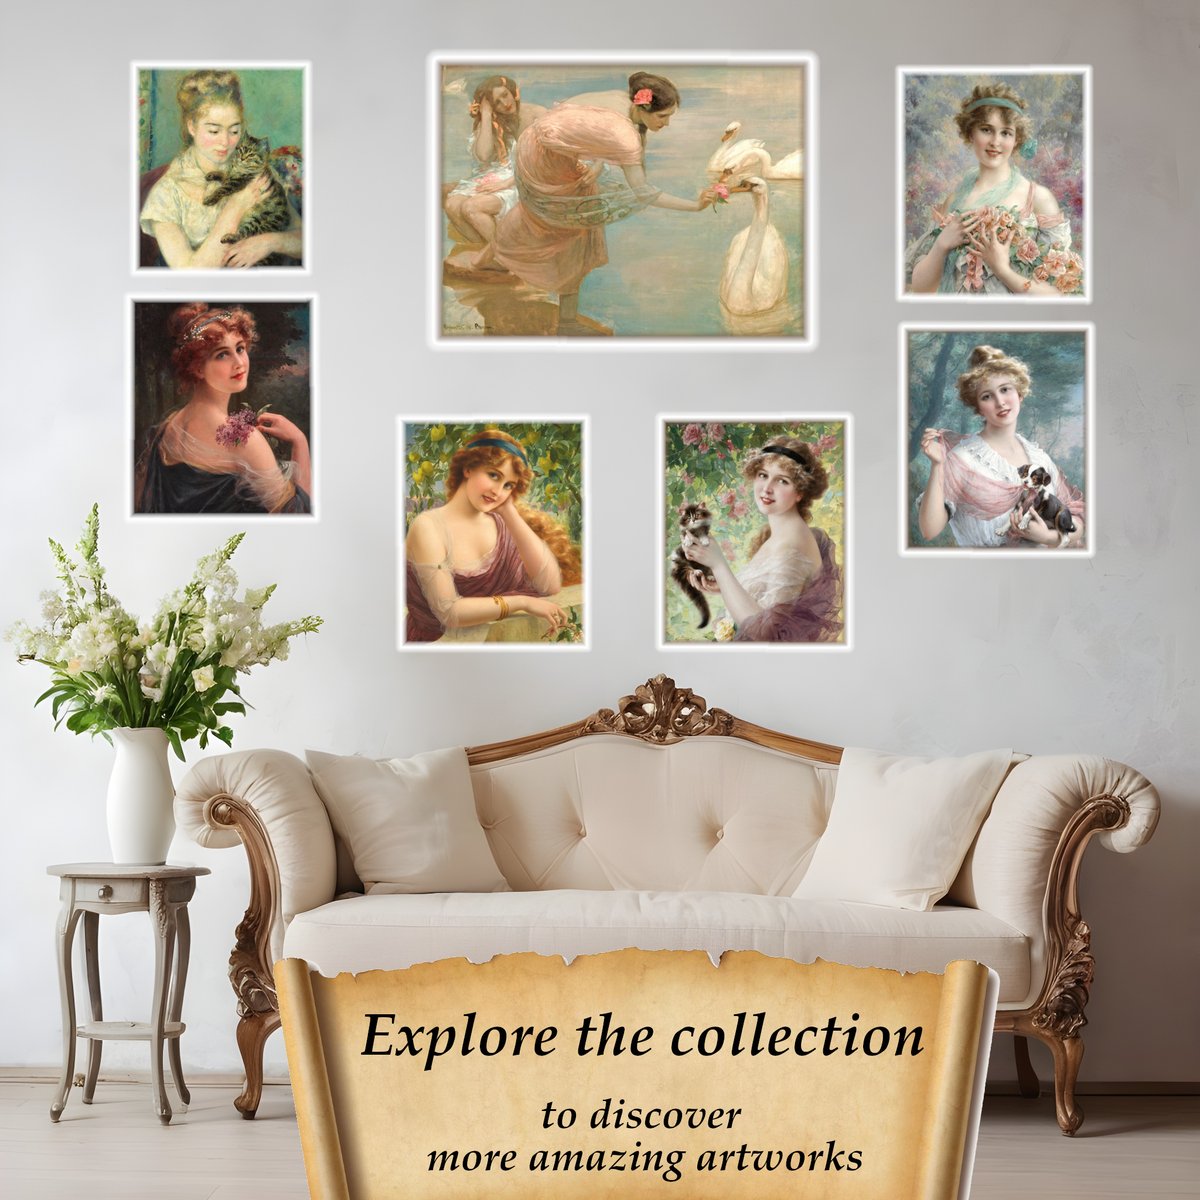 Women in art throughout history
zazzle.com/collections/11…
#femaleportrait #art #fineart #romantic #MothersDay